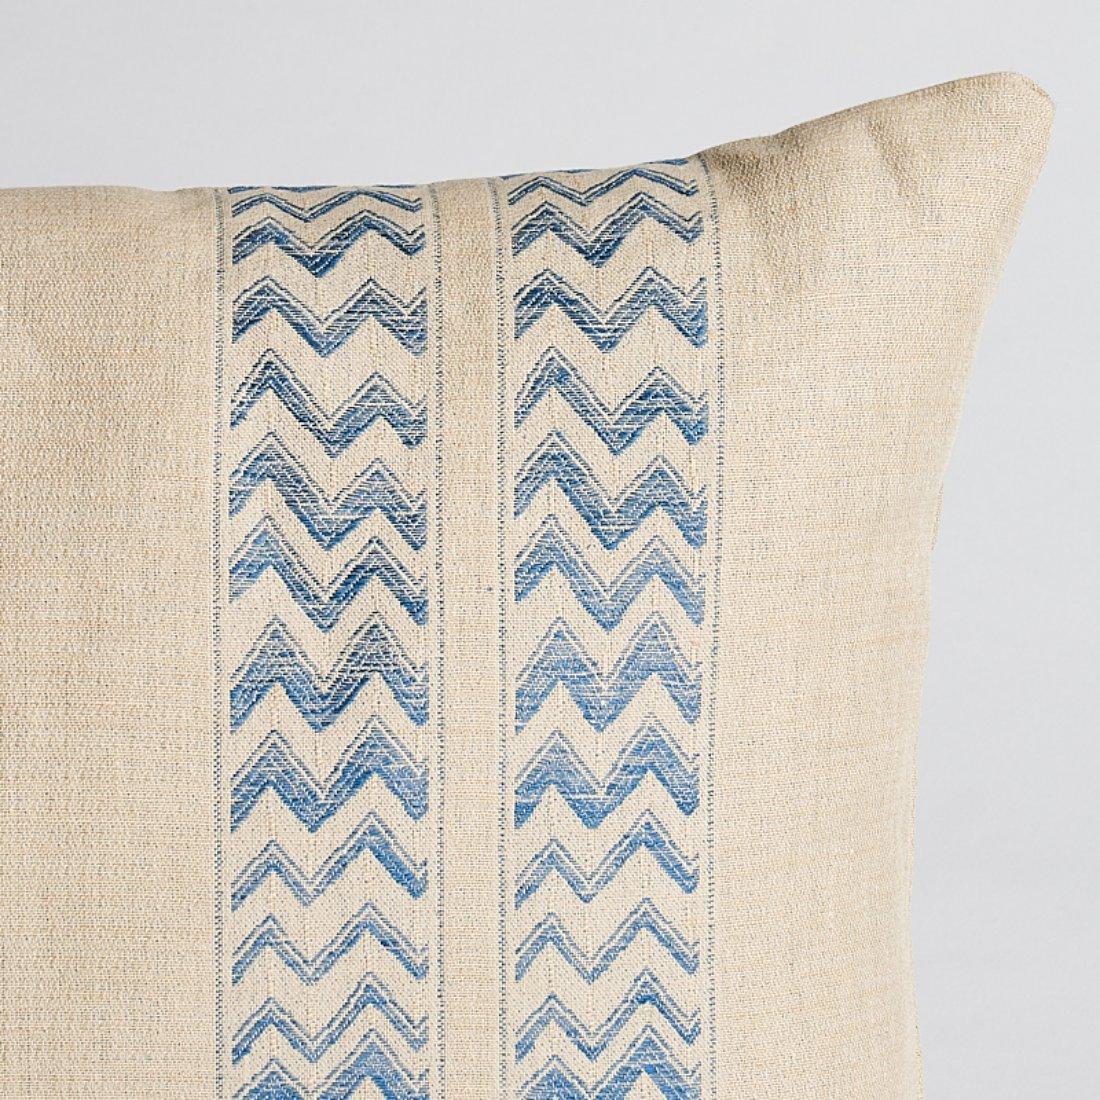 This pillow features Kudu Stripe with a Knife Edge finish. With its alternating, irregular stripes and chevrons, this exceptional woven linen has a tribal look and the sophistication of a rare, antique textile. Pillow includes a feather/down fill